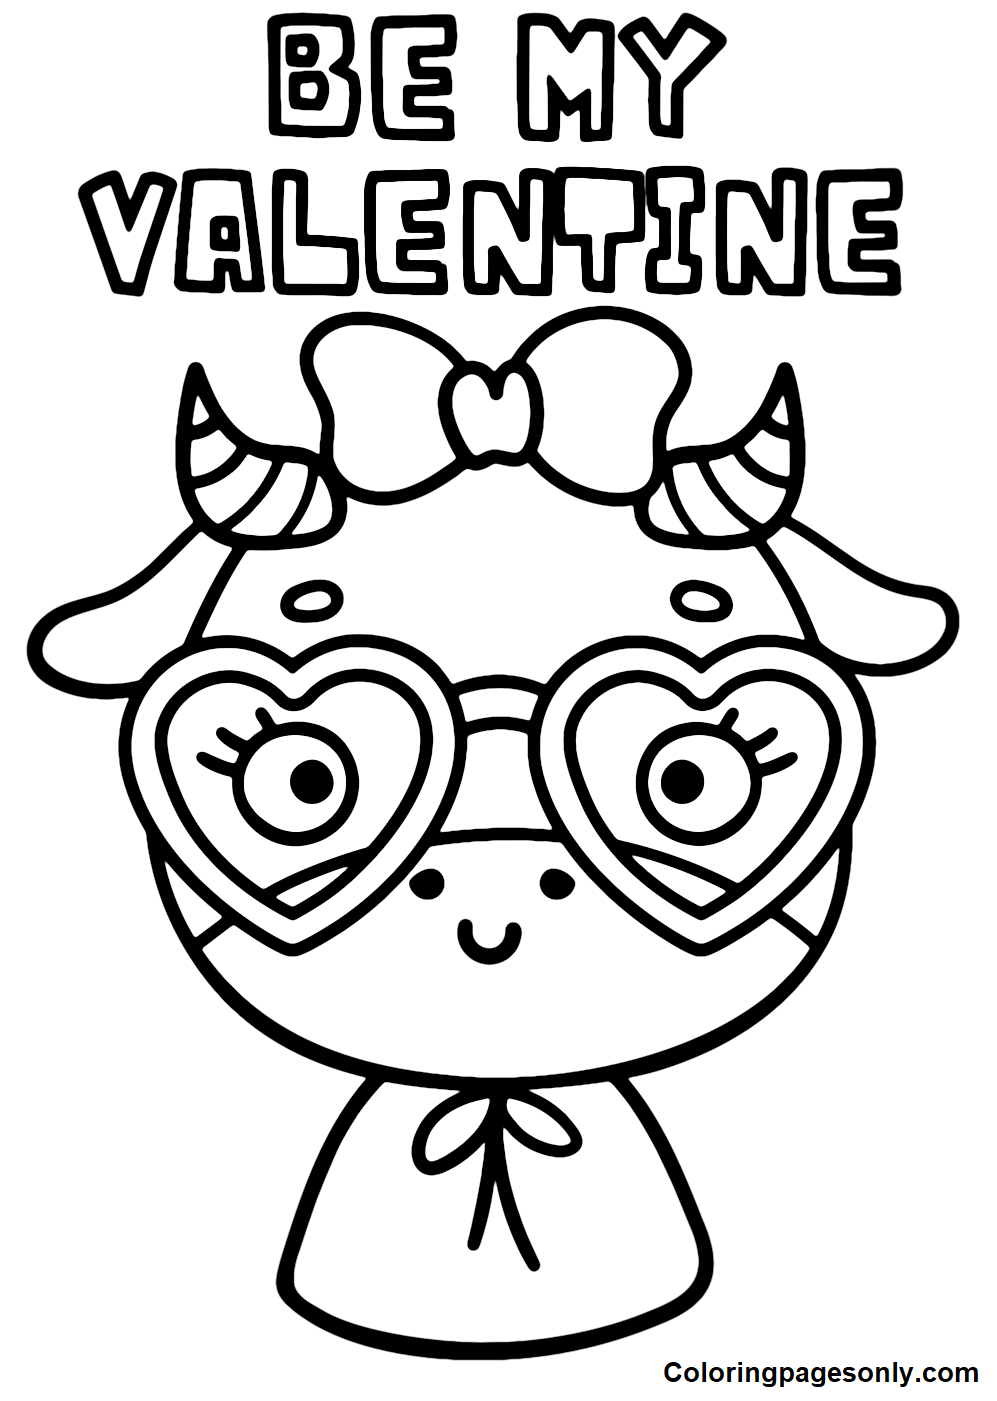 Cute Cow in Valentine’s Day Coloring Pages